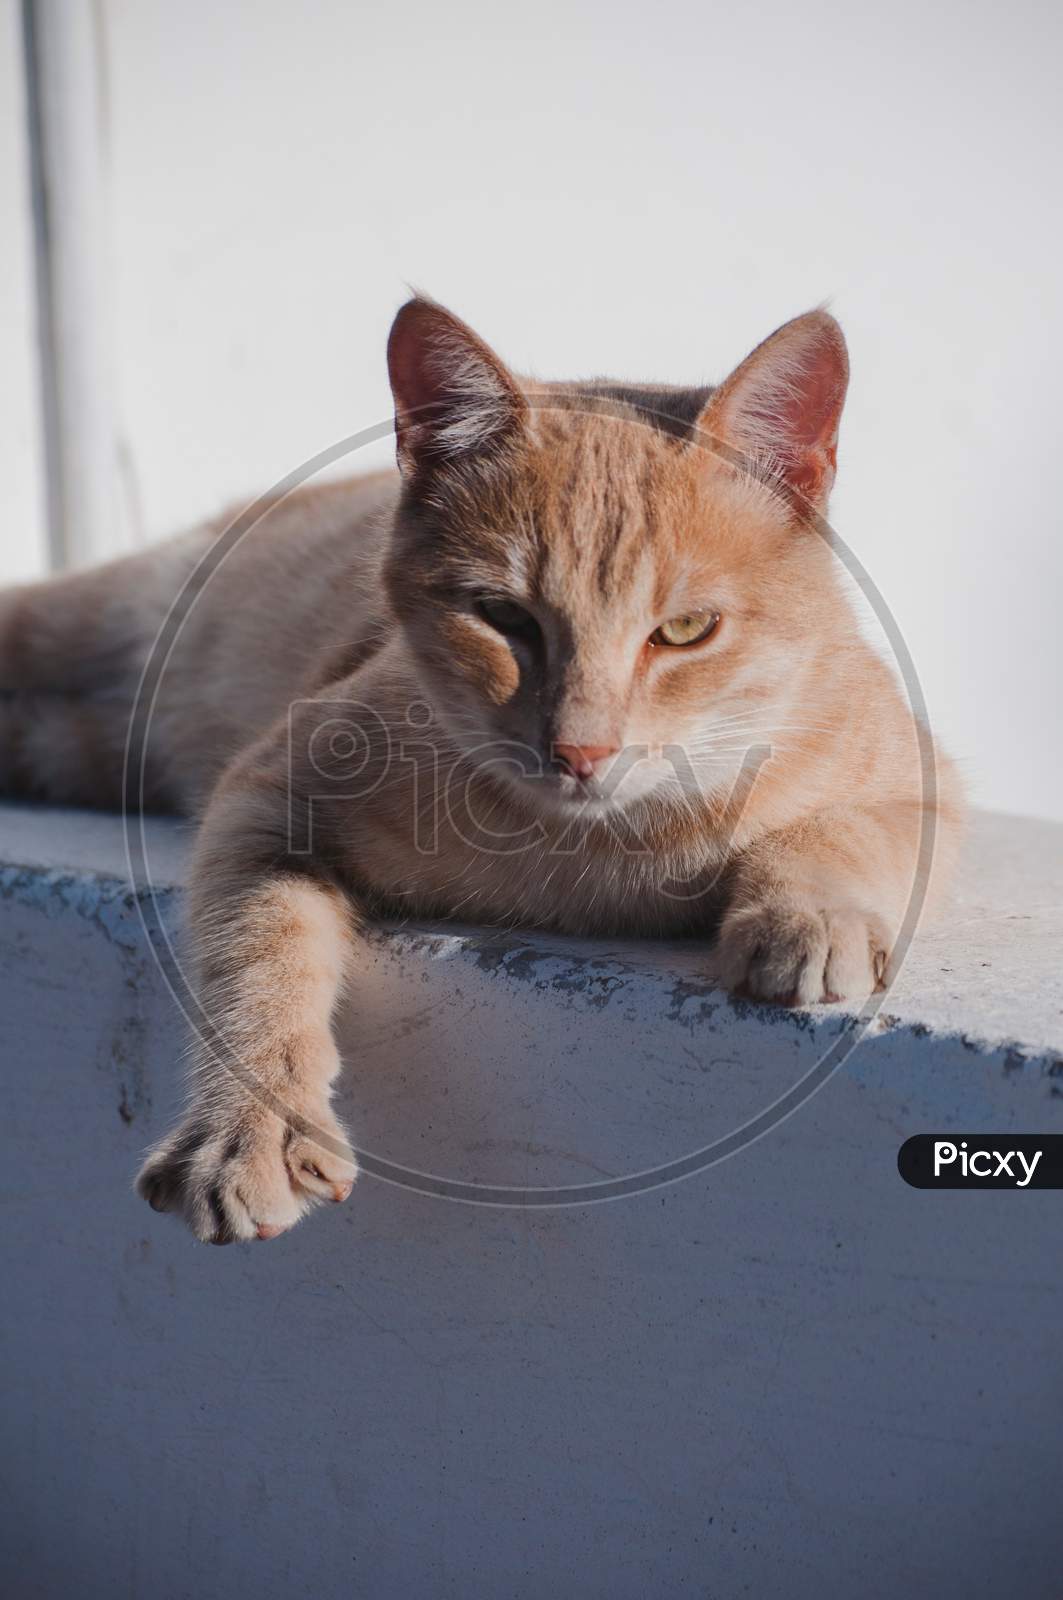 A cat is sitting on wall showing its paw